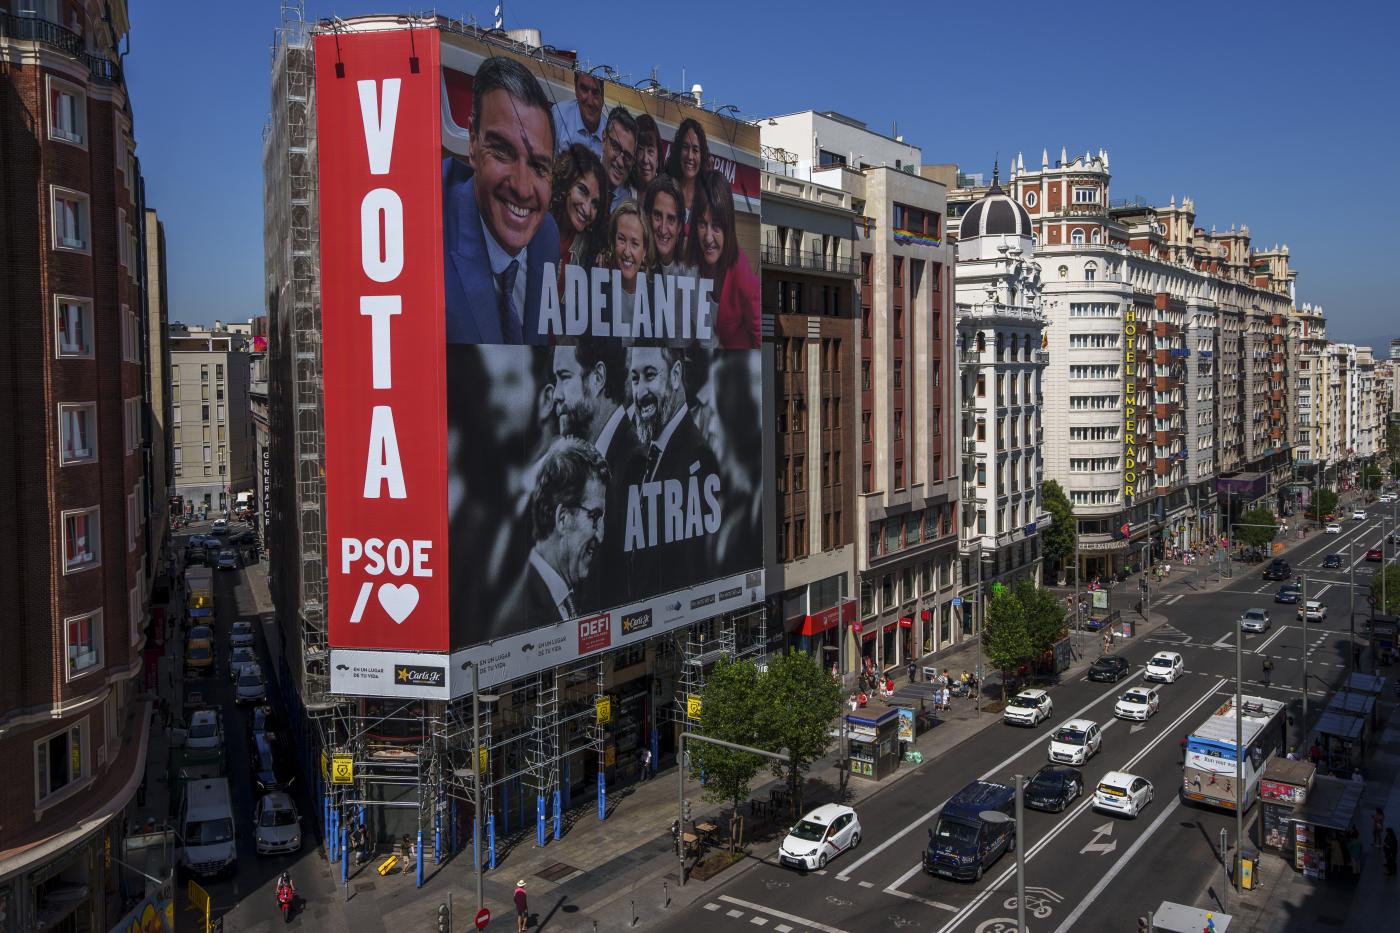 A giant electoral poster depicting Spain's Prime Minister and Socialist candidate Pedro Sánchez, top, and conservative PP party leader Alberto Nunez Feijóo and VOX far-right party leader Santiago Abascal is displayed on a building at the Gran Via avenue in Madrid, Spain, Monday, July 10, 2023. A general election on Sunday July 23, 2023, could make Spain the latest European Union member to swing to the right. Prime Minister Pedro Sánchez called the early election after his Spanish Socialist Workers' Party and its far-left partner, Unidas Podemos, took a beating in local and regional elections. (AP Photo/Manu Fernandez)

Associated Press/LaPresse
Only Italy and Spain